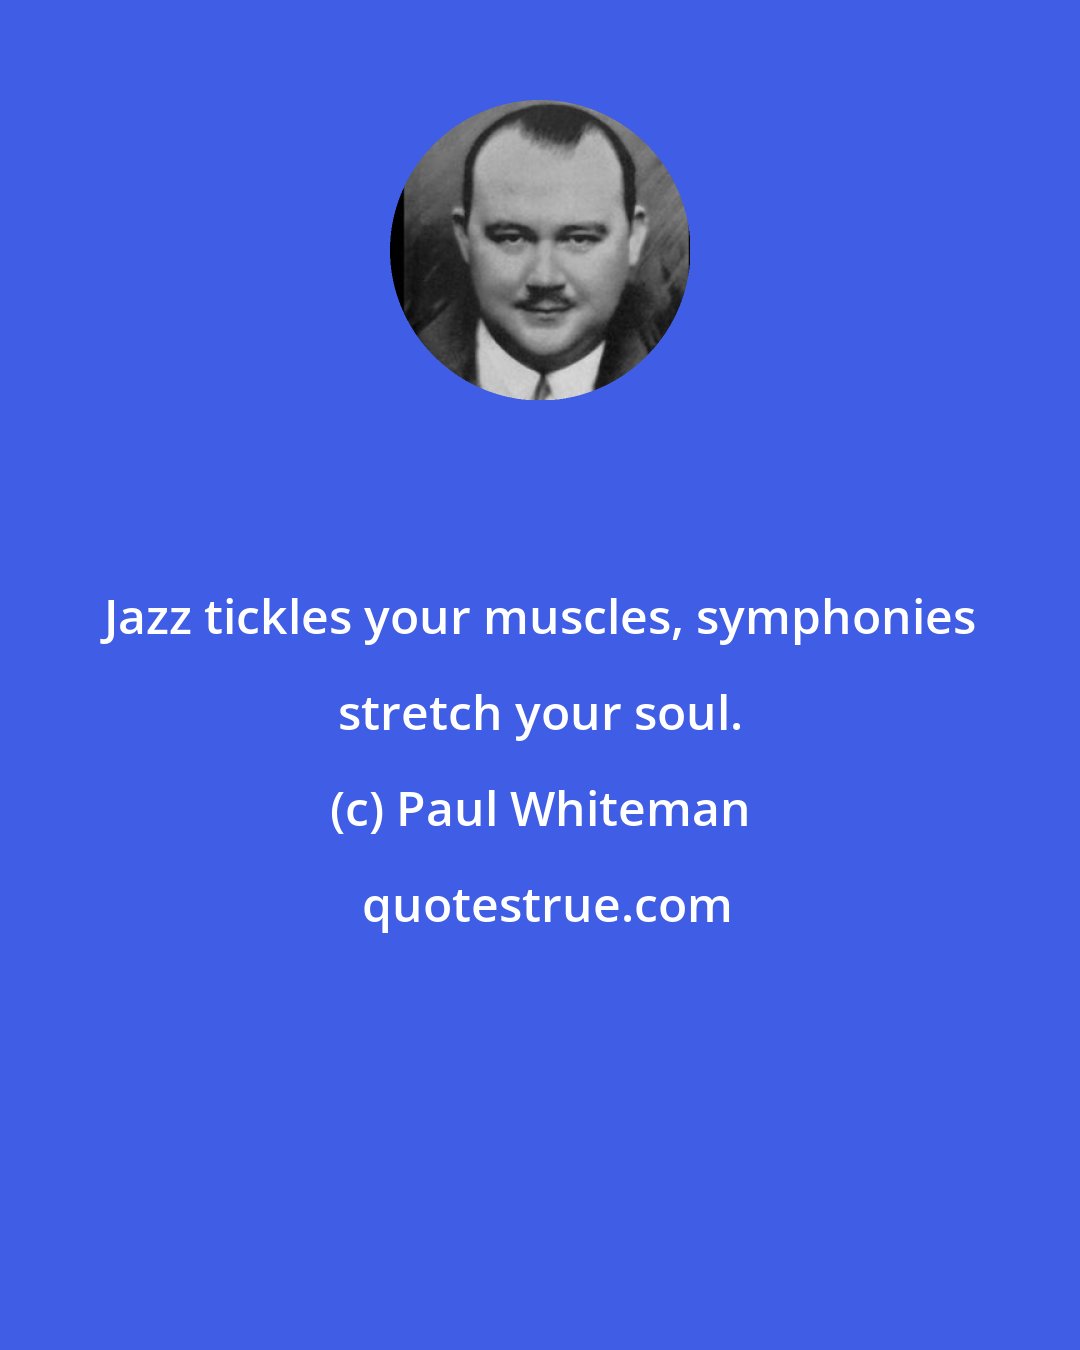 Paul Whiteman: Jazz tickles your muscles, symphonies stretch your soul.